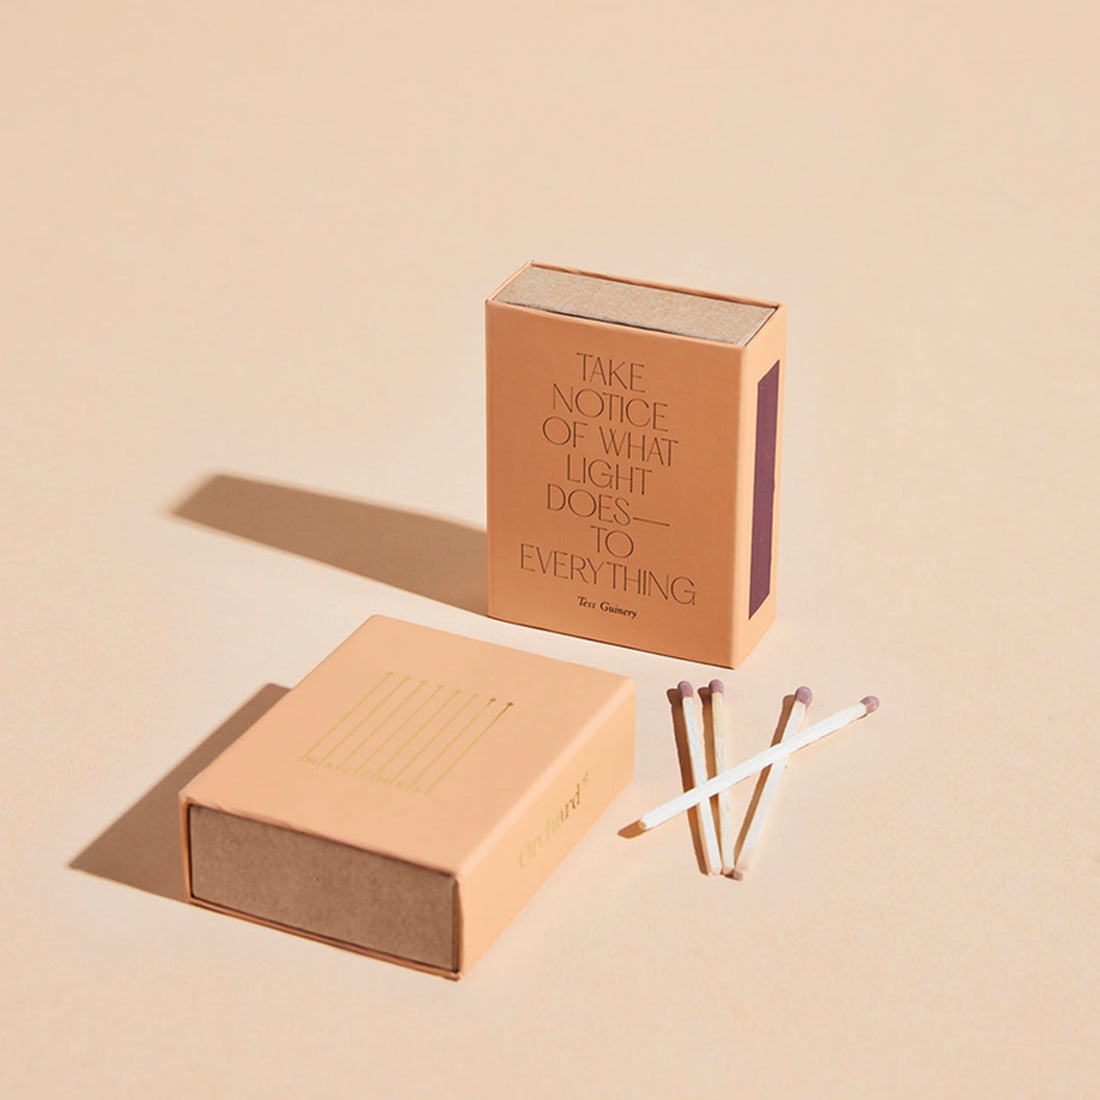 MATCHBOX ~ RITUAL WARE BY ORCHARD ST.